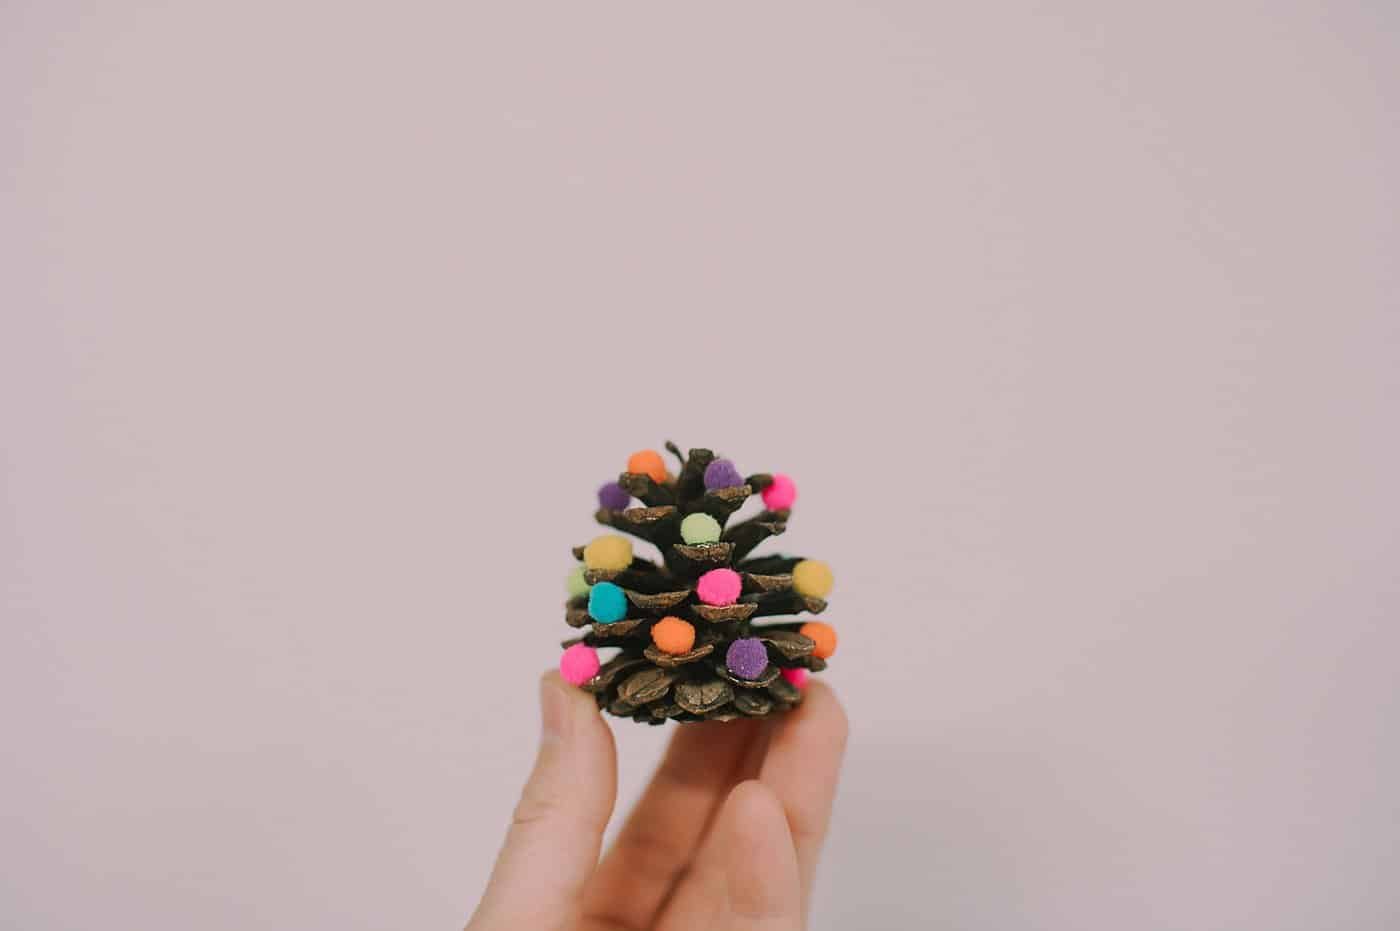 How to make mini pine cone christmas trees with pompom ornaments on them.